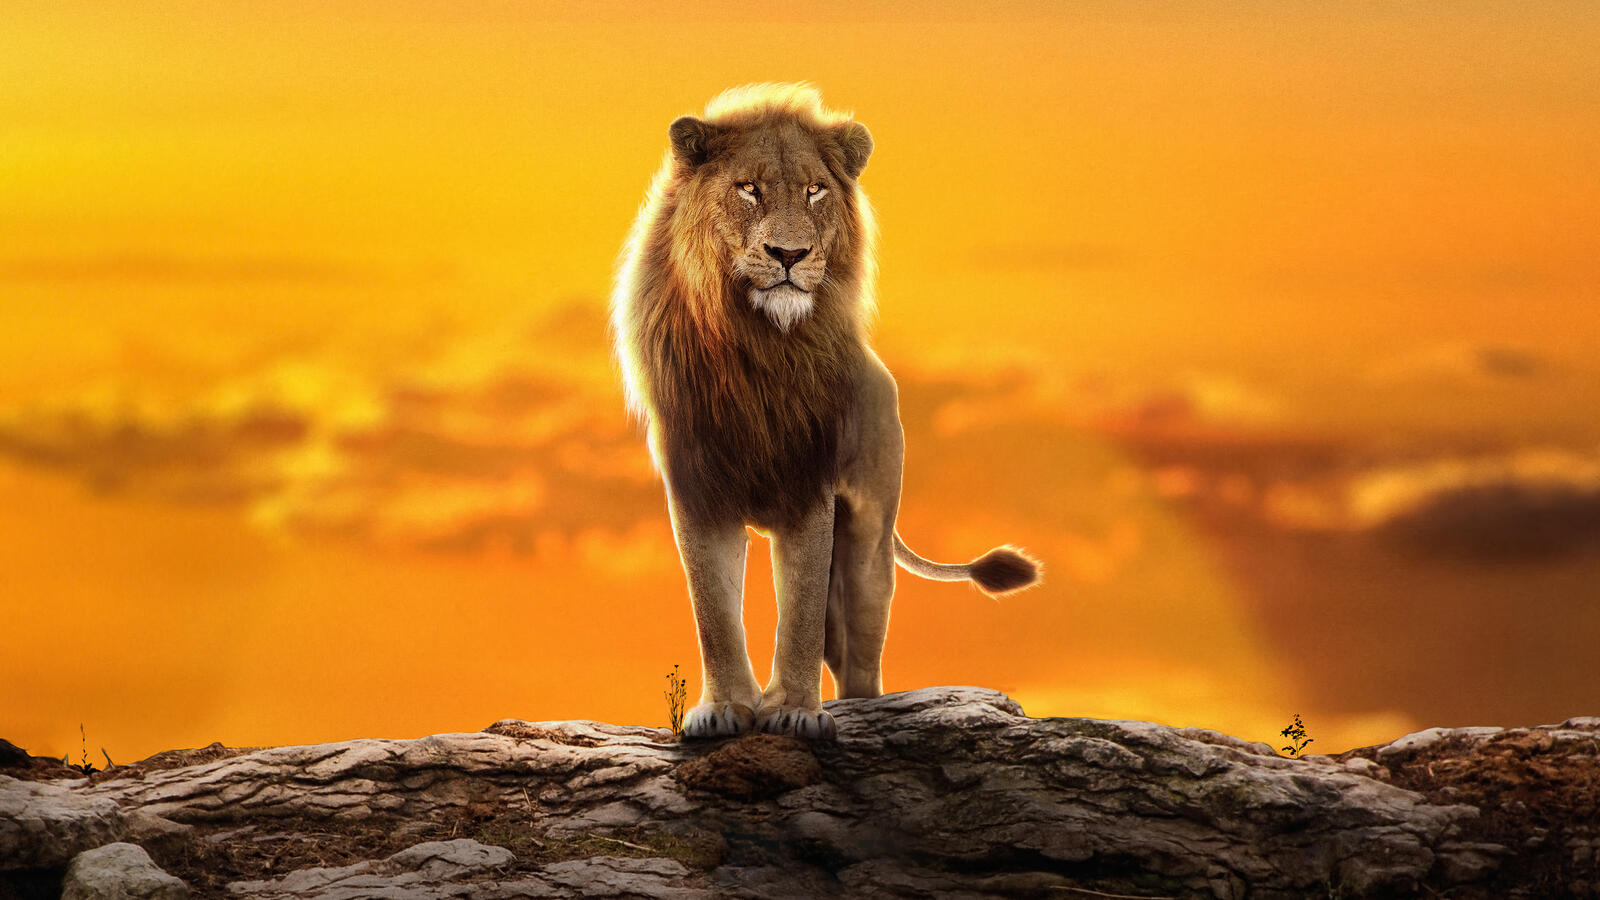 Free photo The lion king stands on a chipping block at sunset